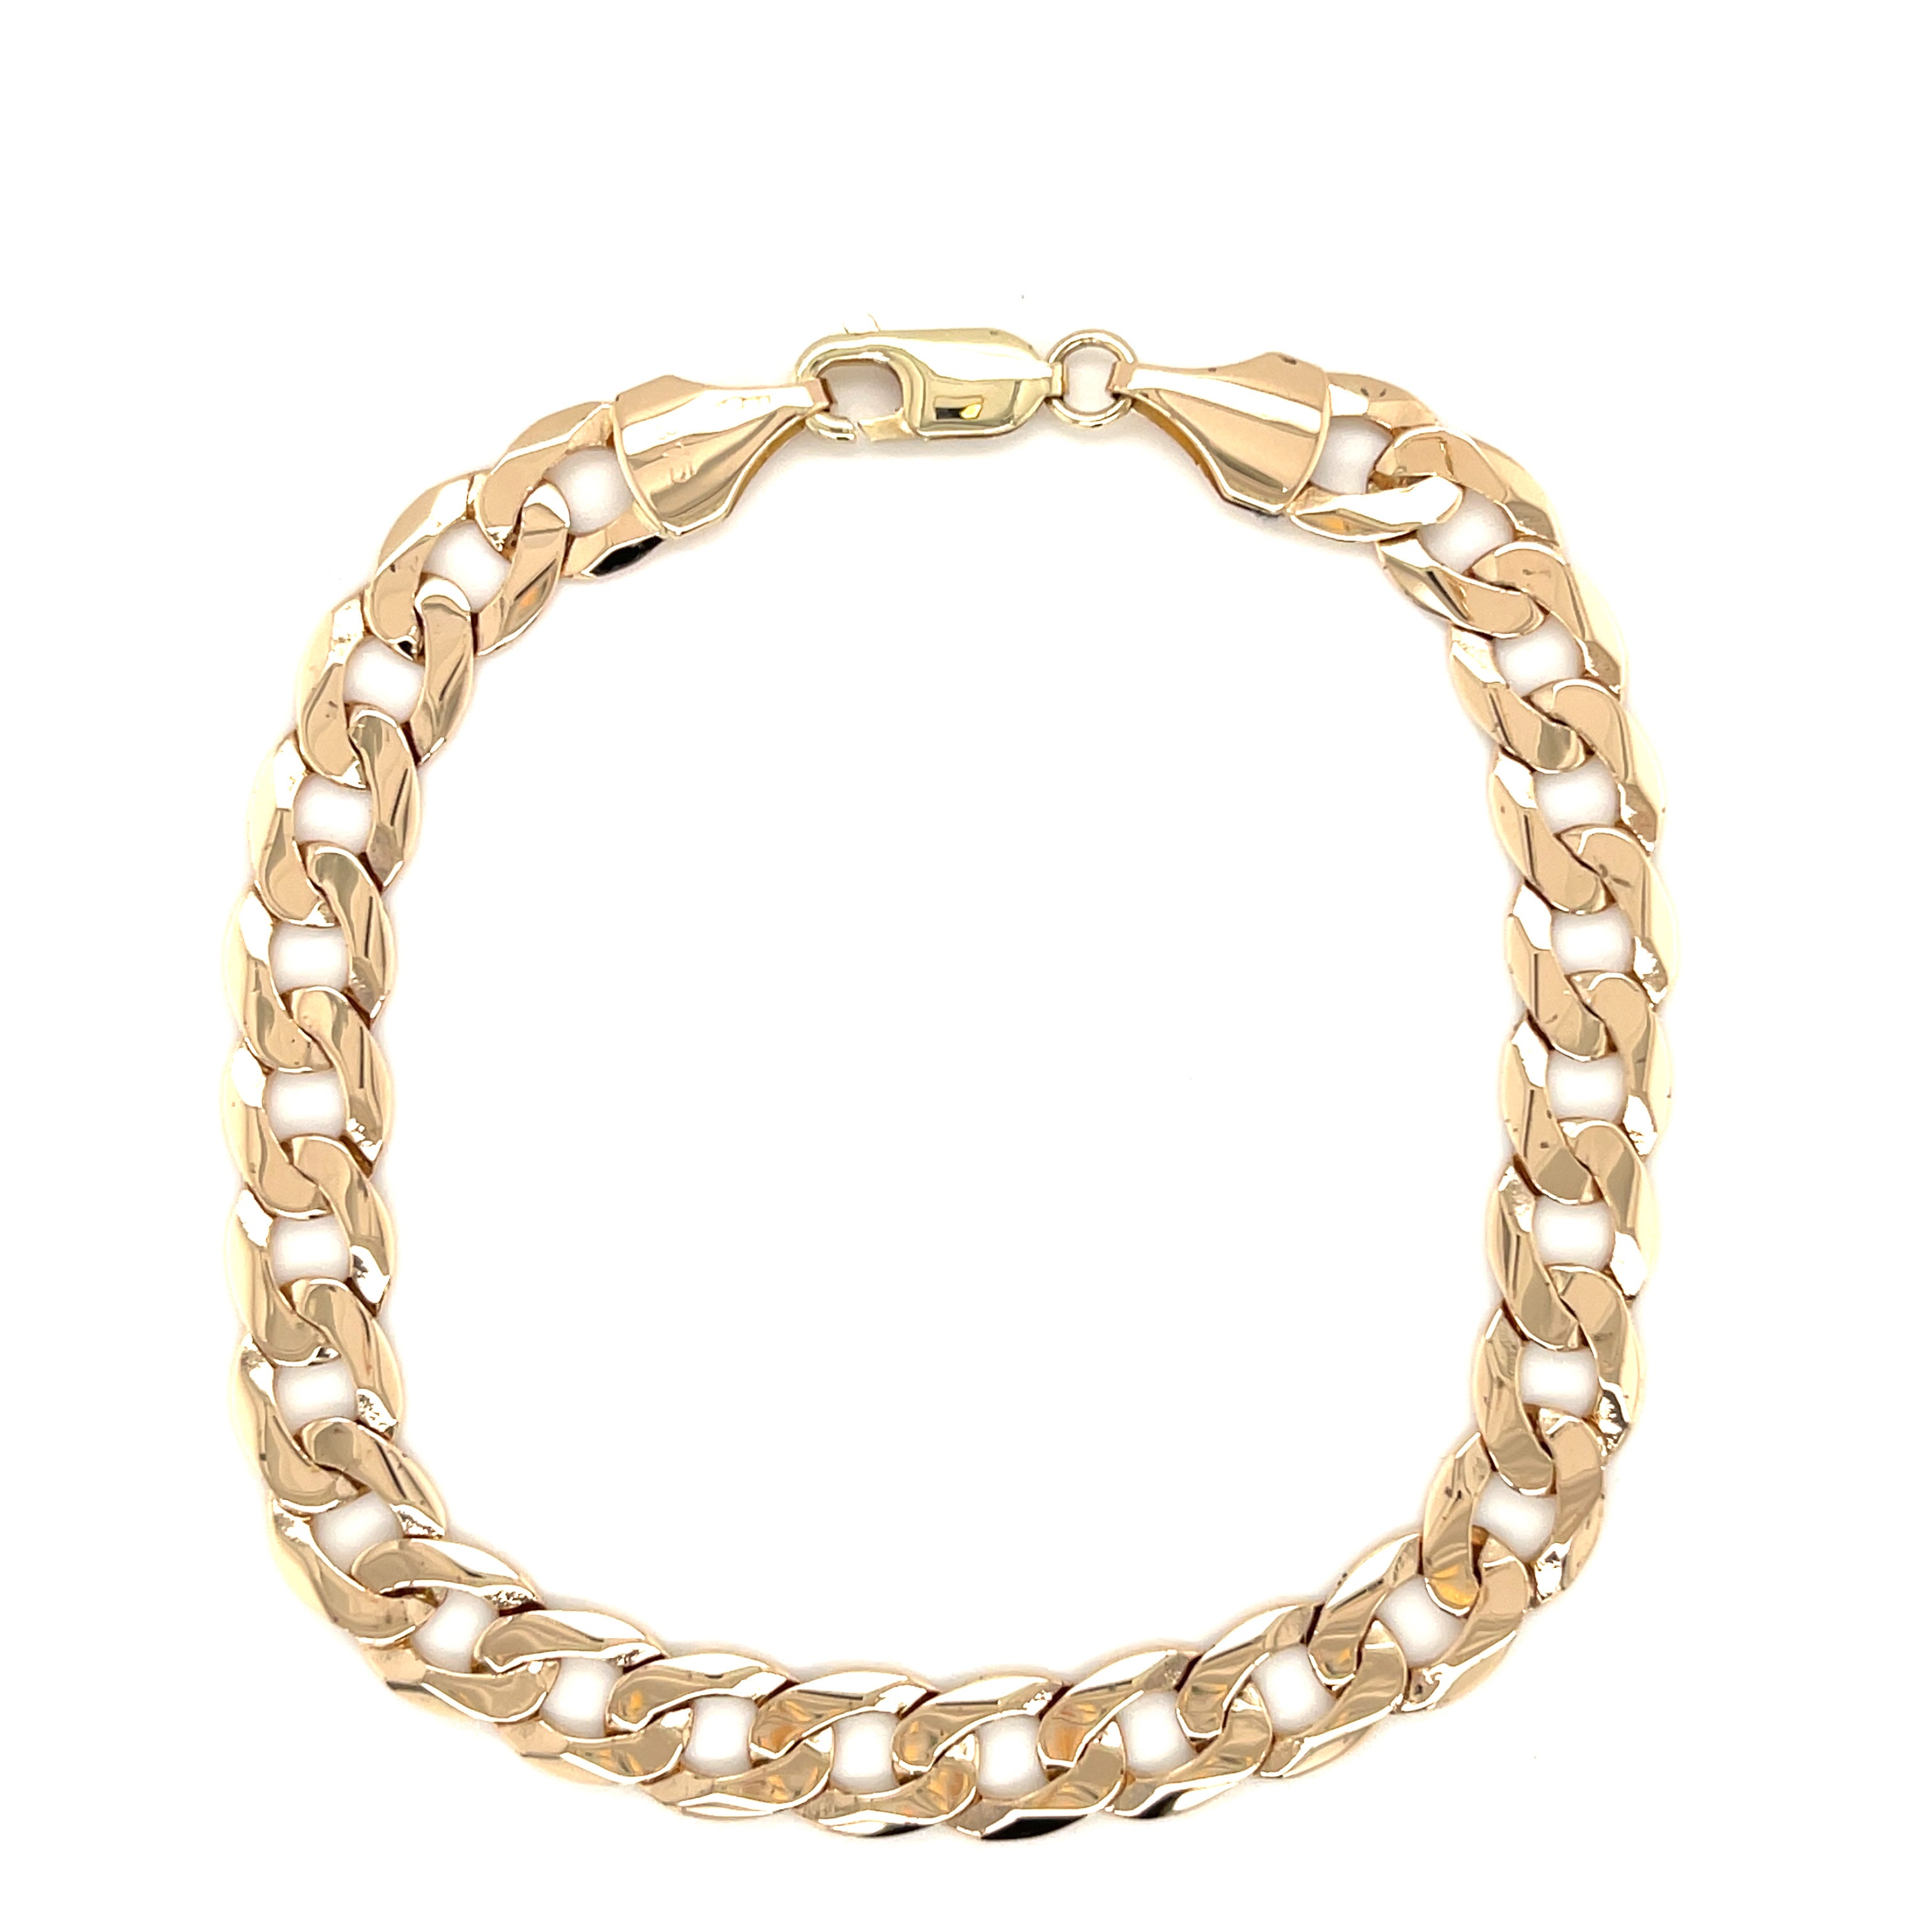 9ct Yellow Gold 8.5 Inch Curb Link Bracelet - 12.25g SOLD